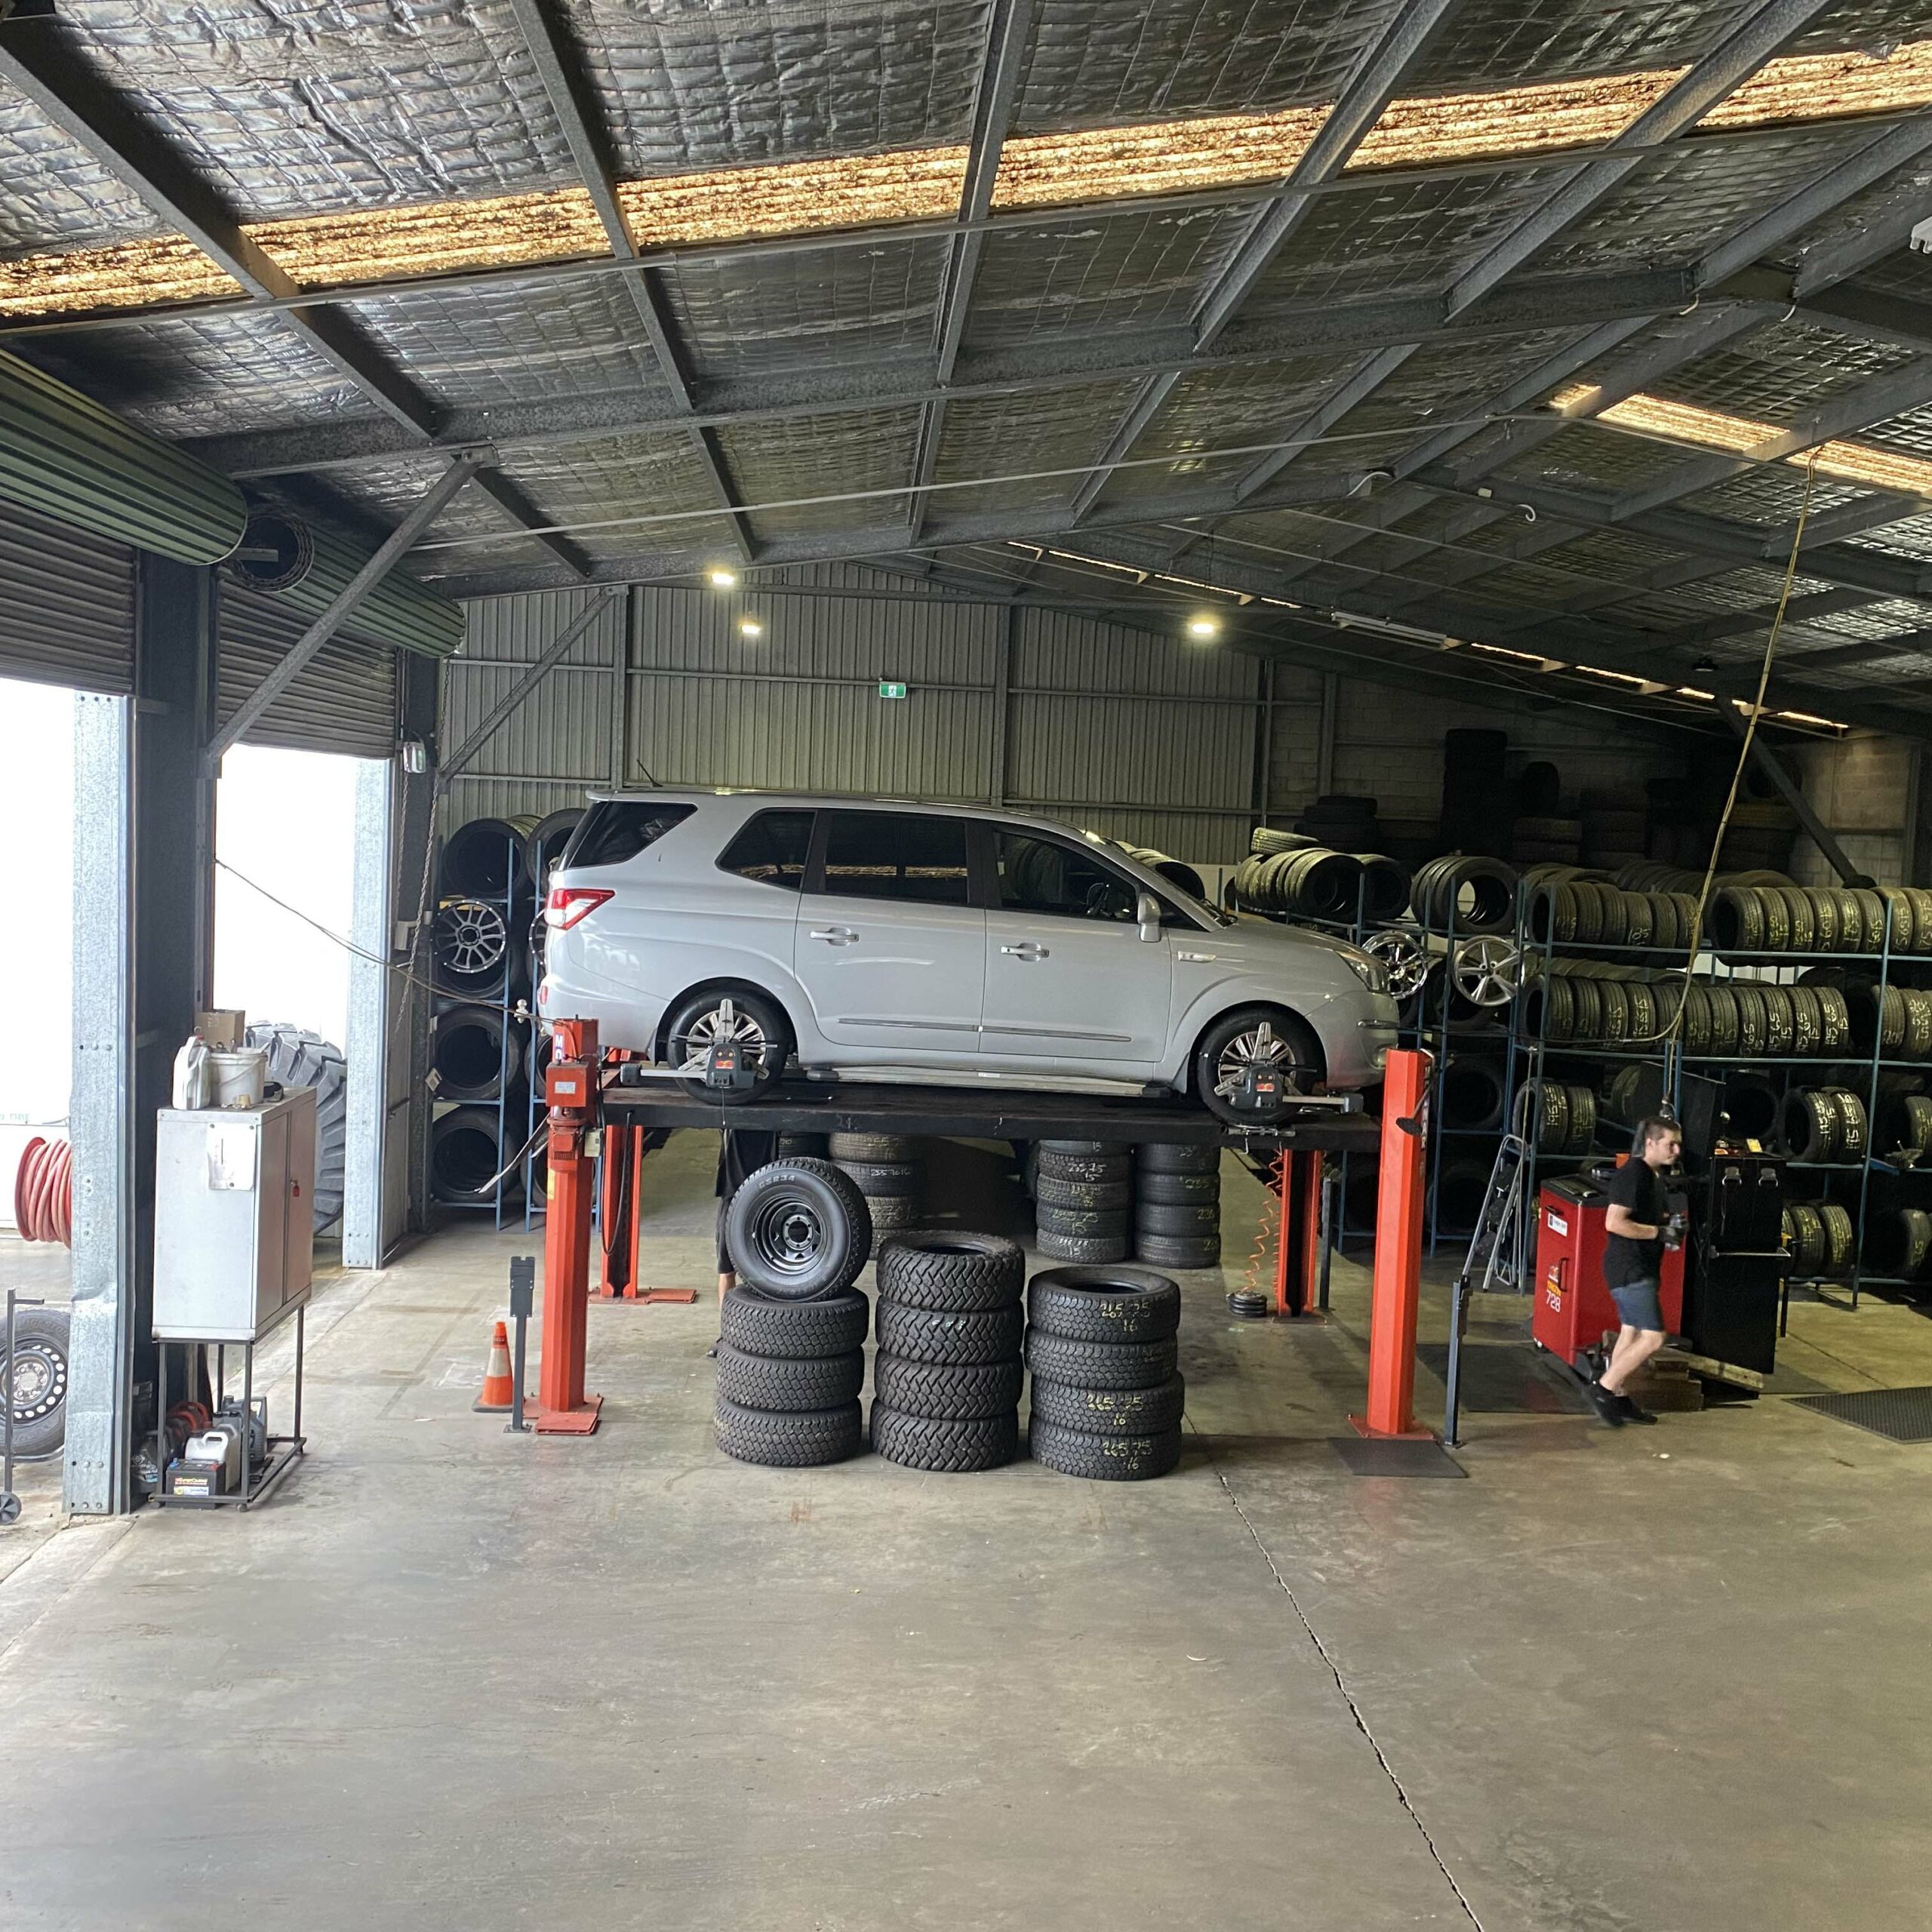 Car on jack at the Branigans Burleigh Heads tyre shop.